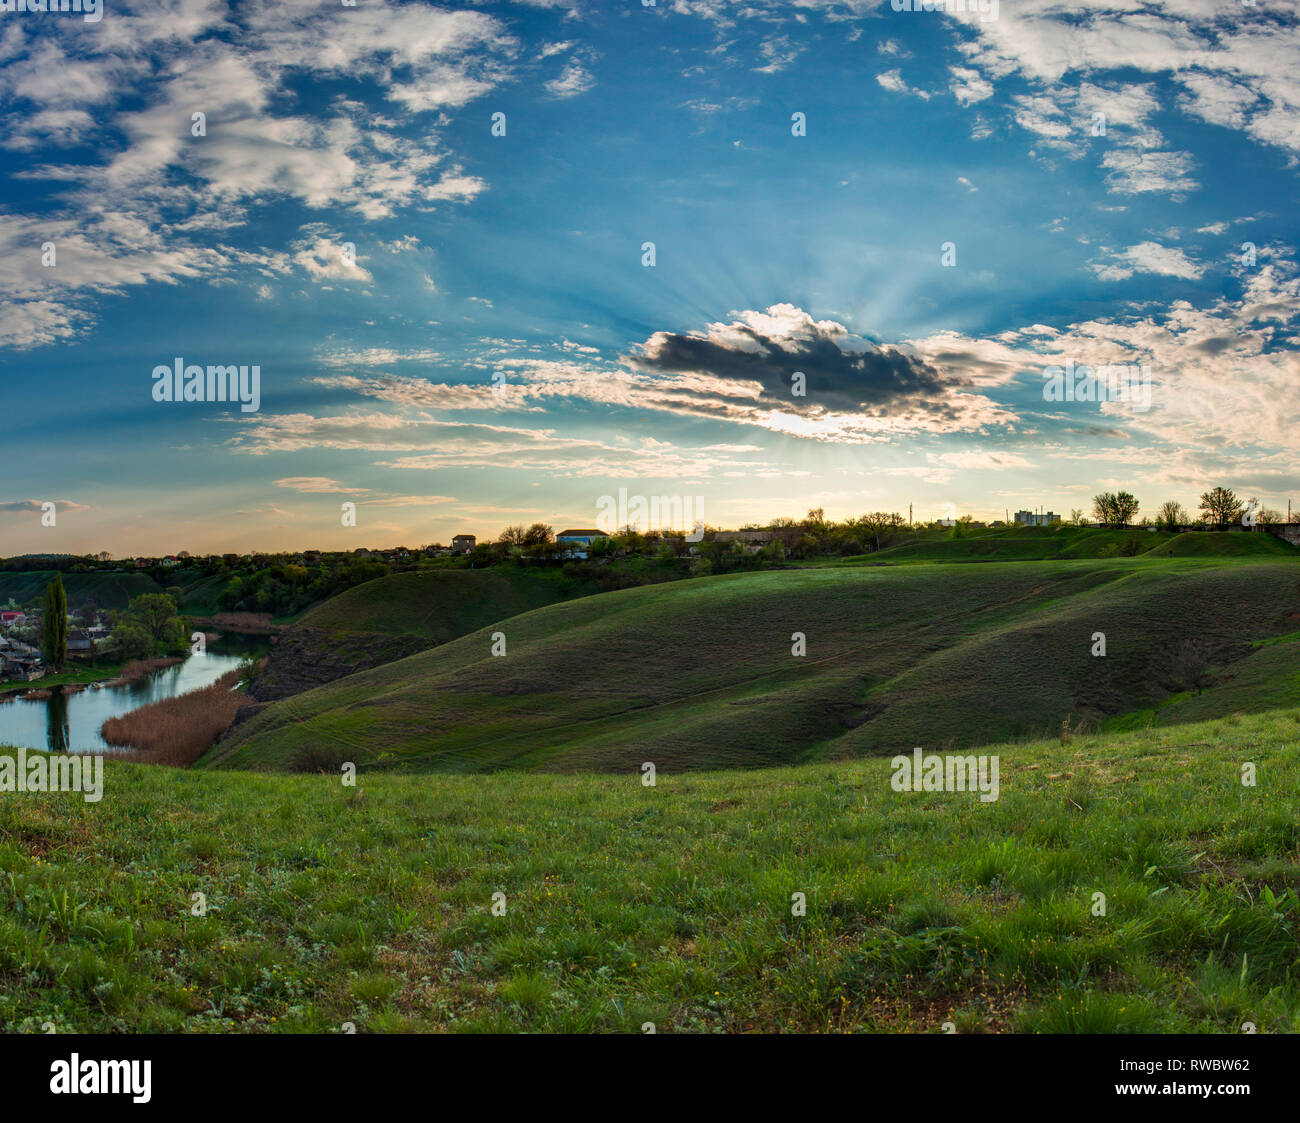 Spring HDR landscape. Ukrainian crags. A hills covered by the green grass. Cloudy sky. Ukraine, Krivoy Rog, MOPR. Stock Photo